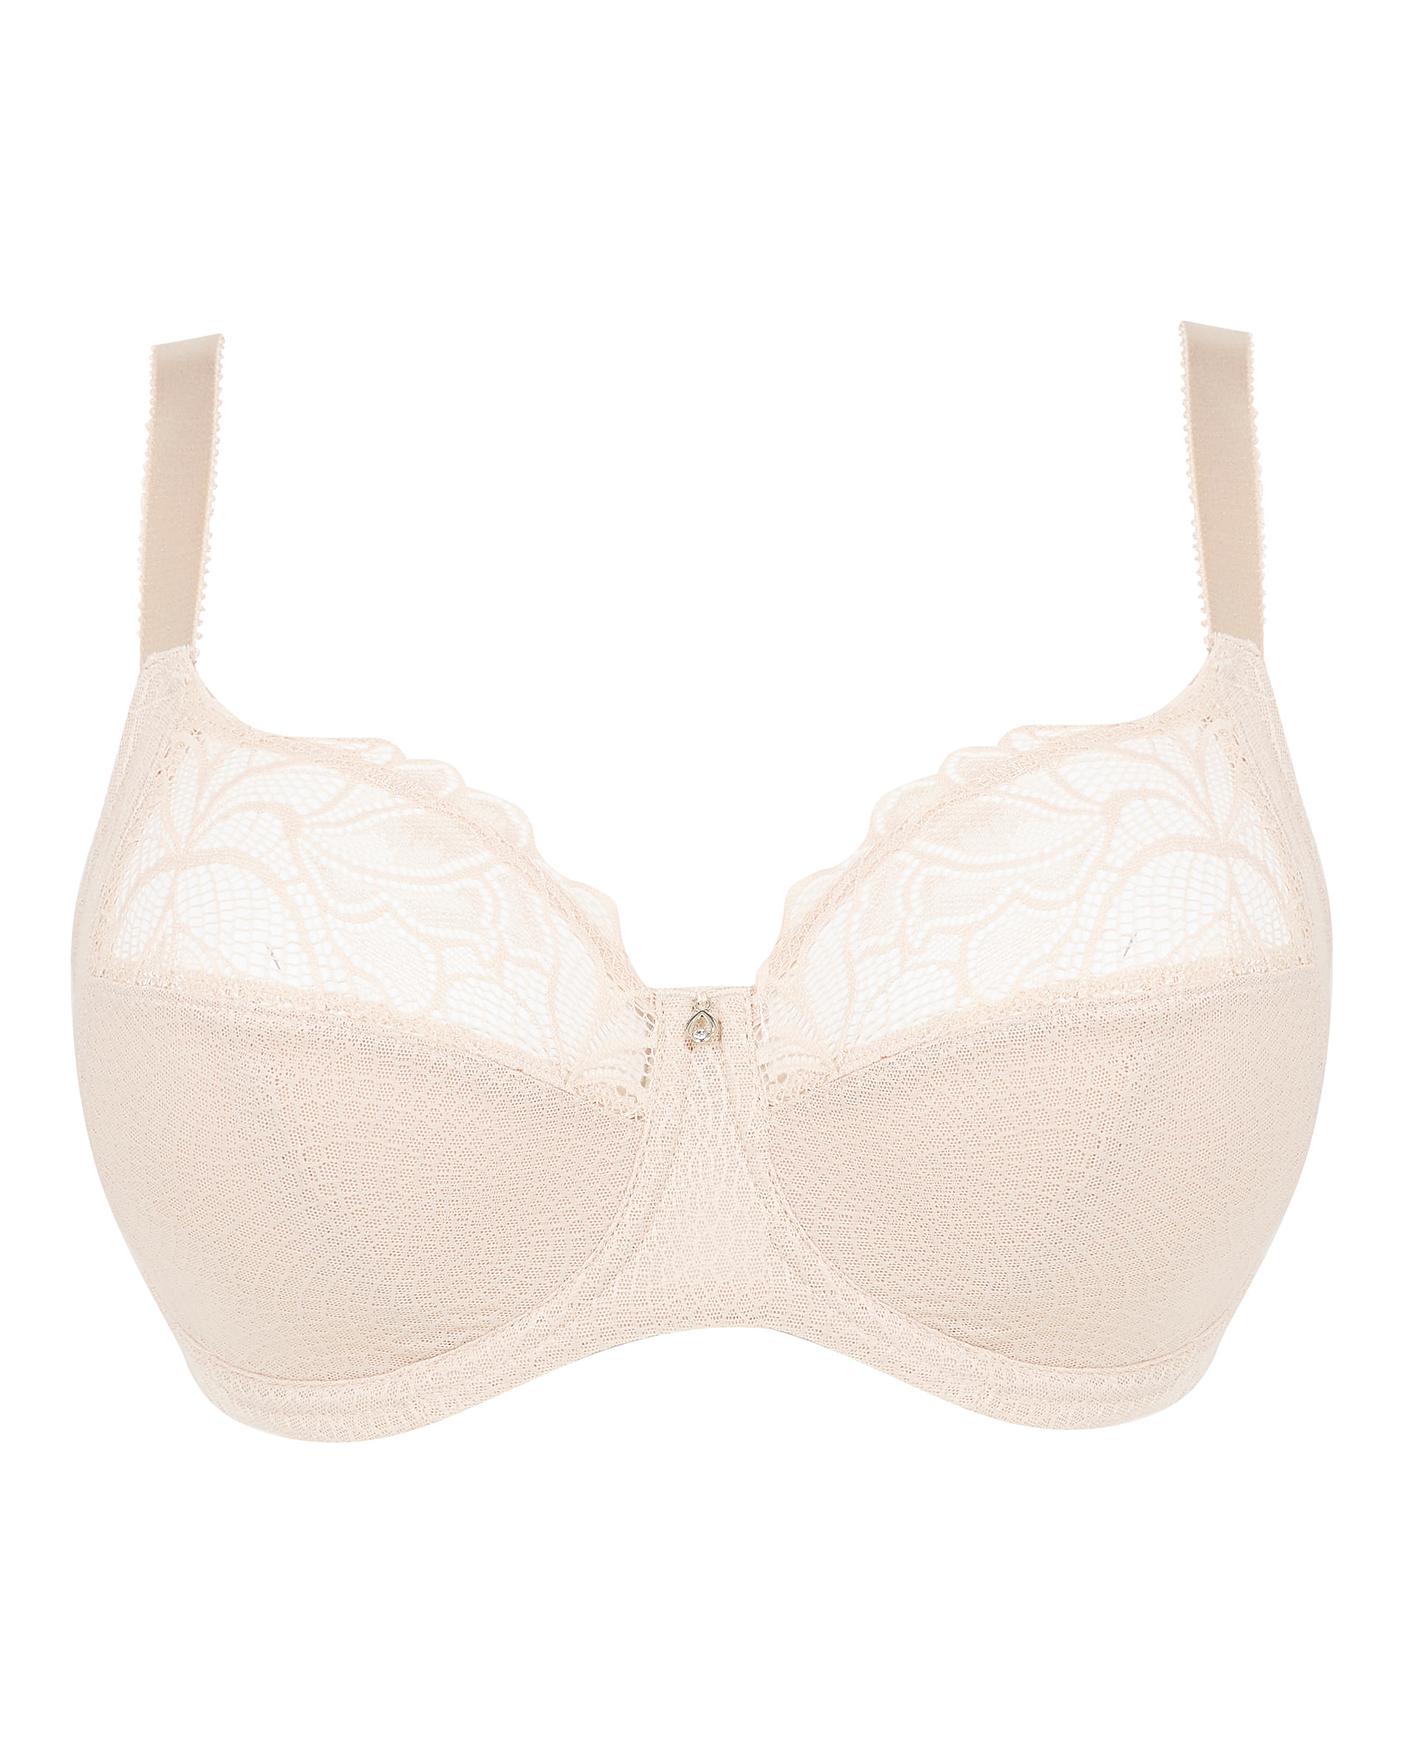 Jacqueline Lace Underwire Full Cup Bra with Side Support - Blest Bras